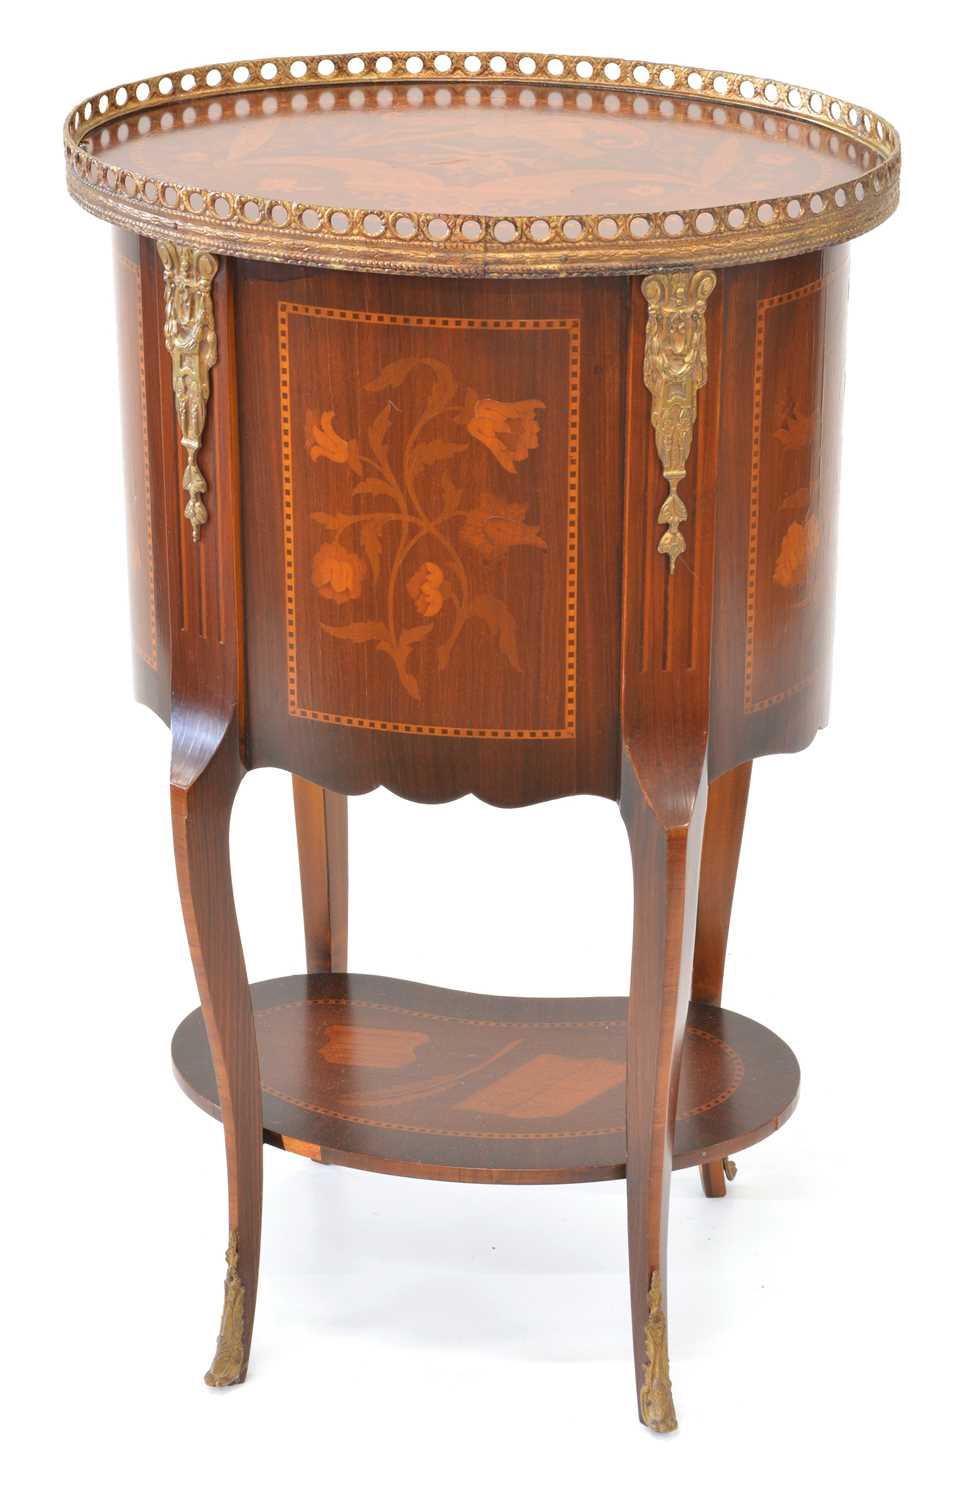 Late 19th Century Louis XV Style French Marquetry and Ormolu Mounted Side Table - Image 2 of 8